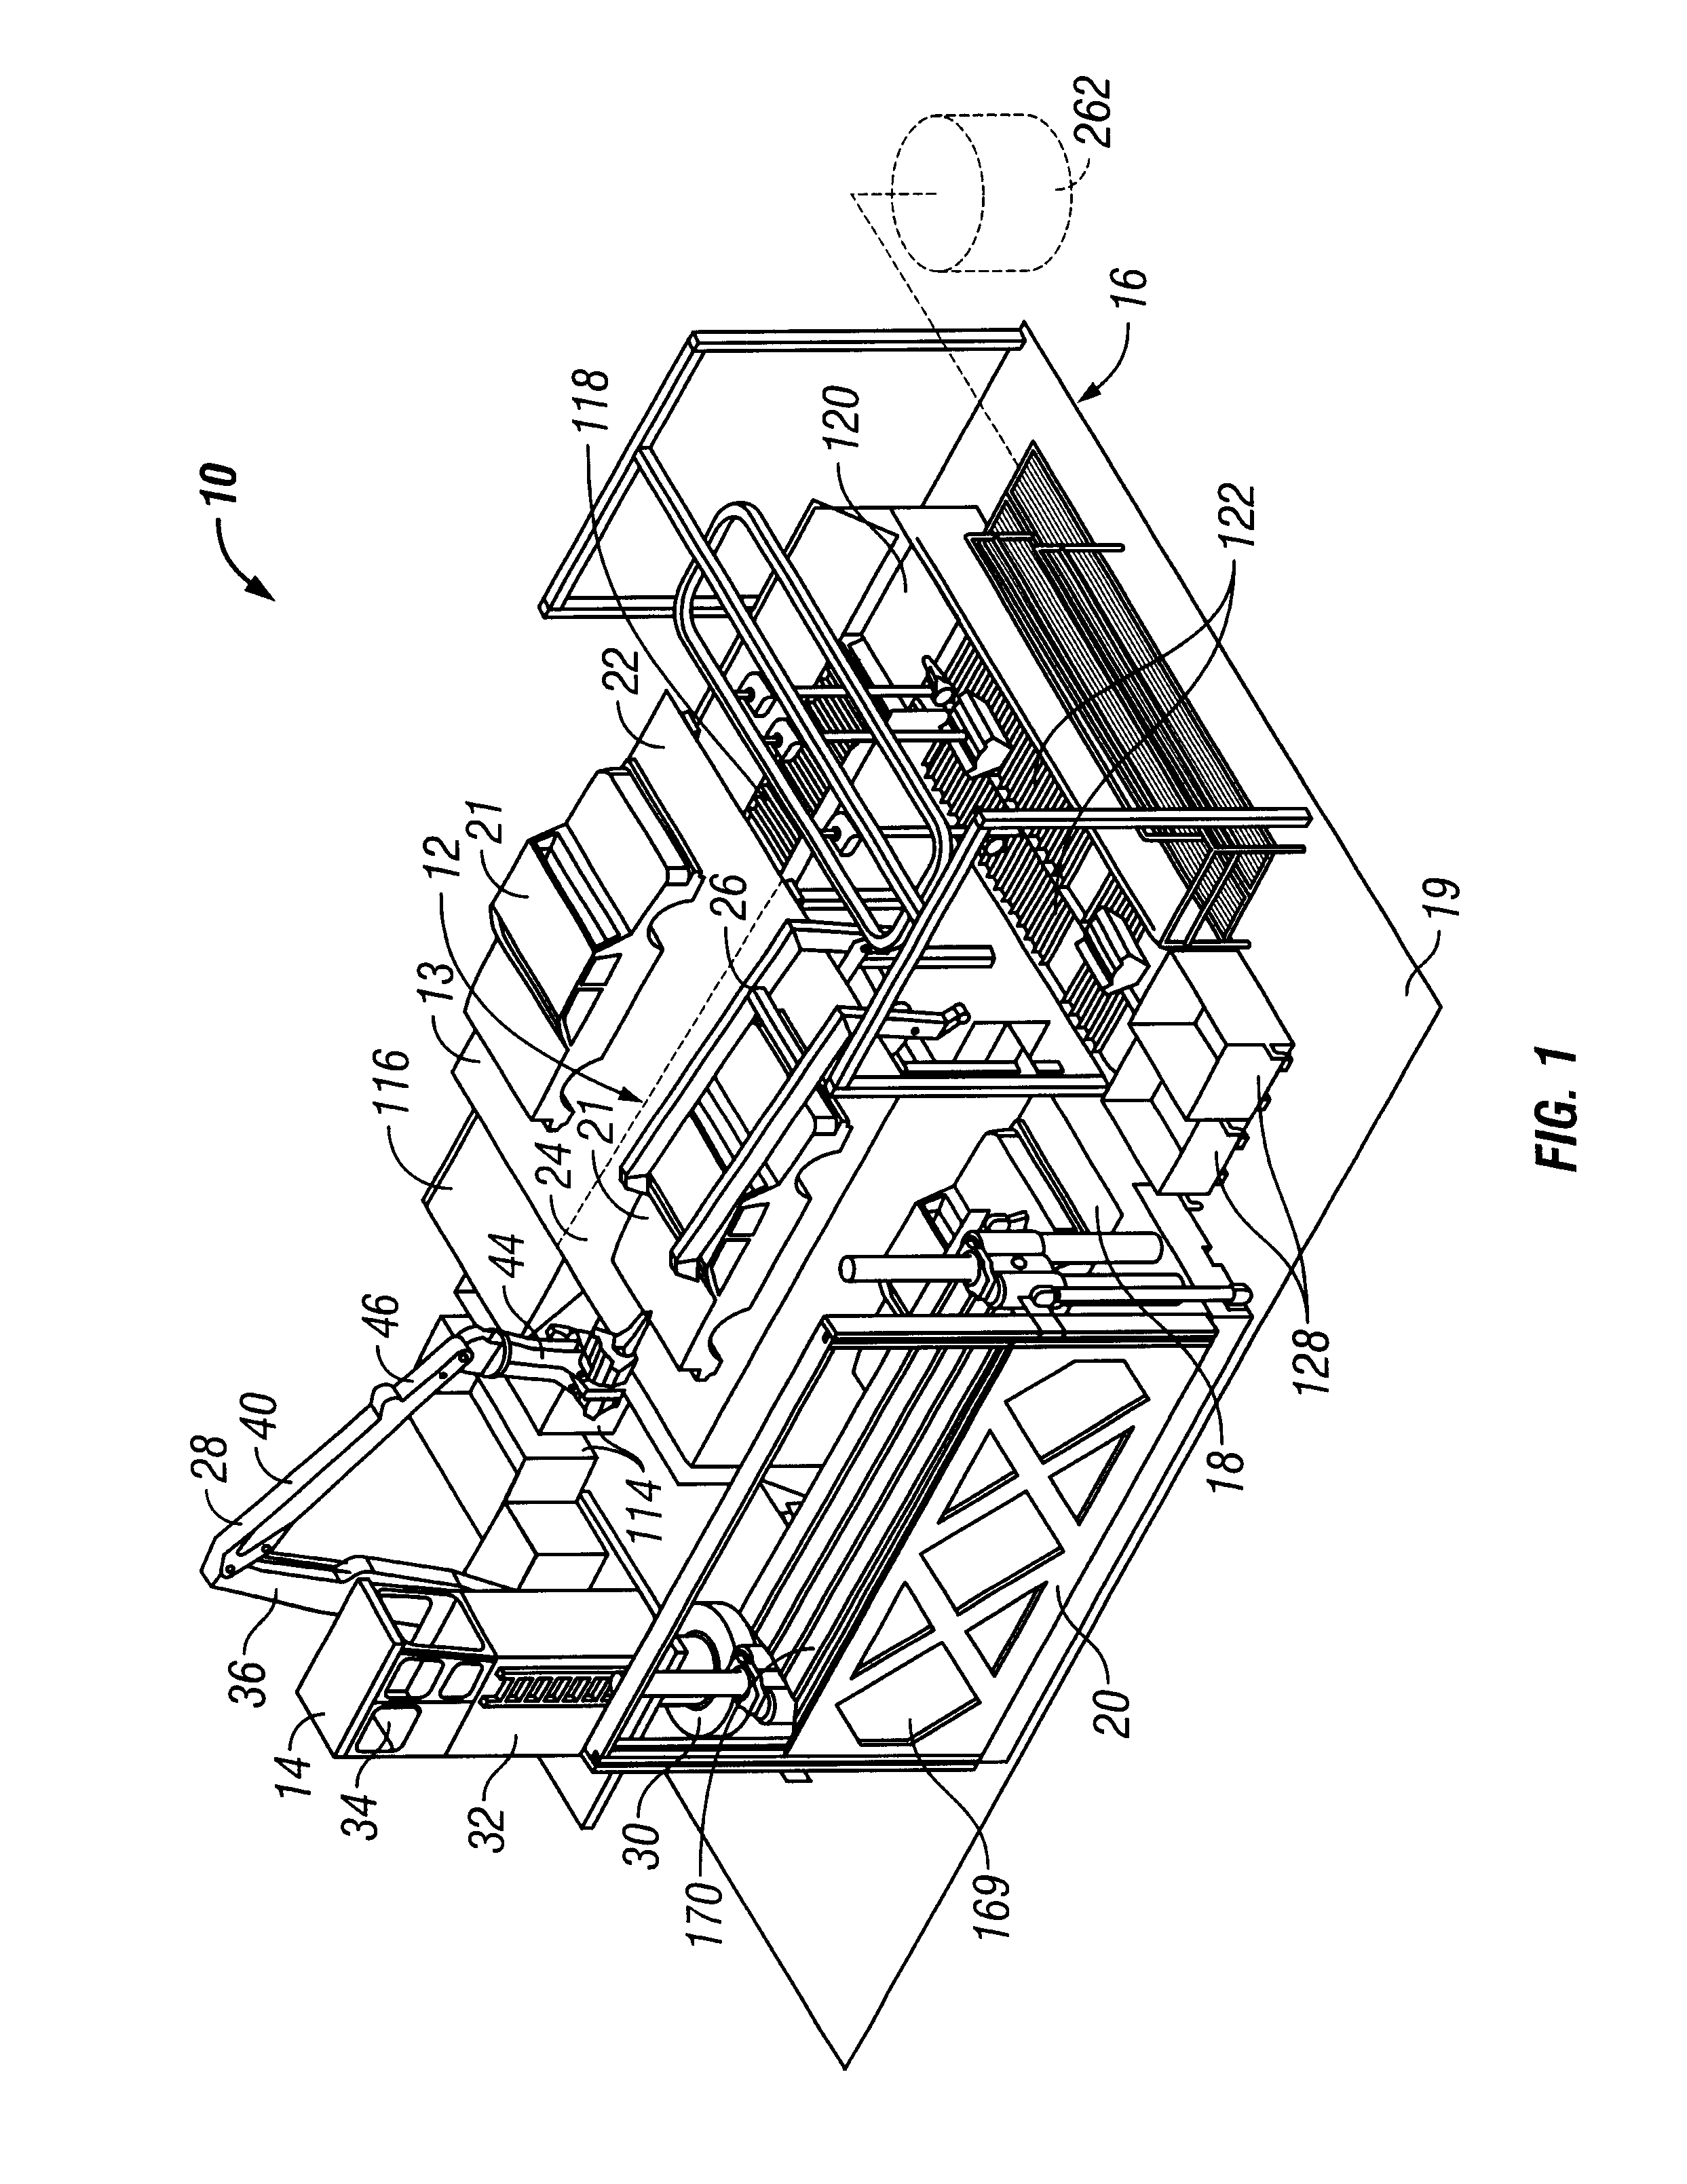 Vehicle recycling system and method